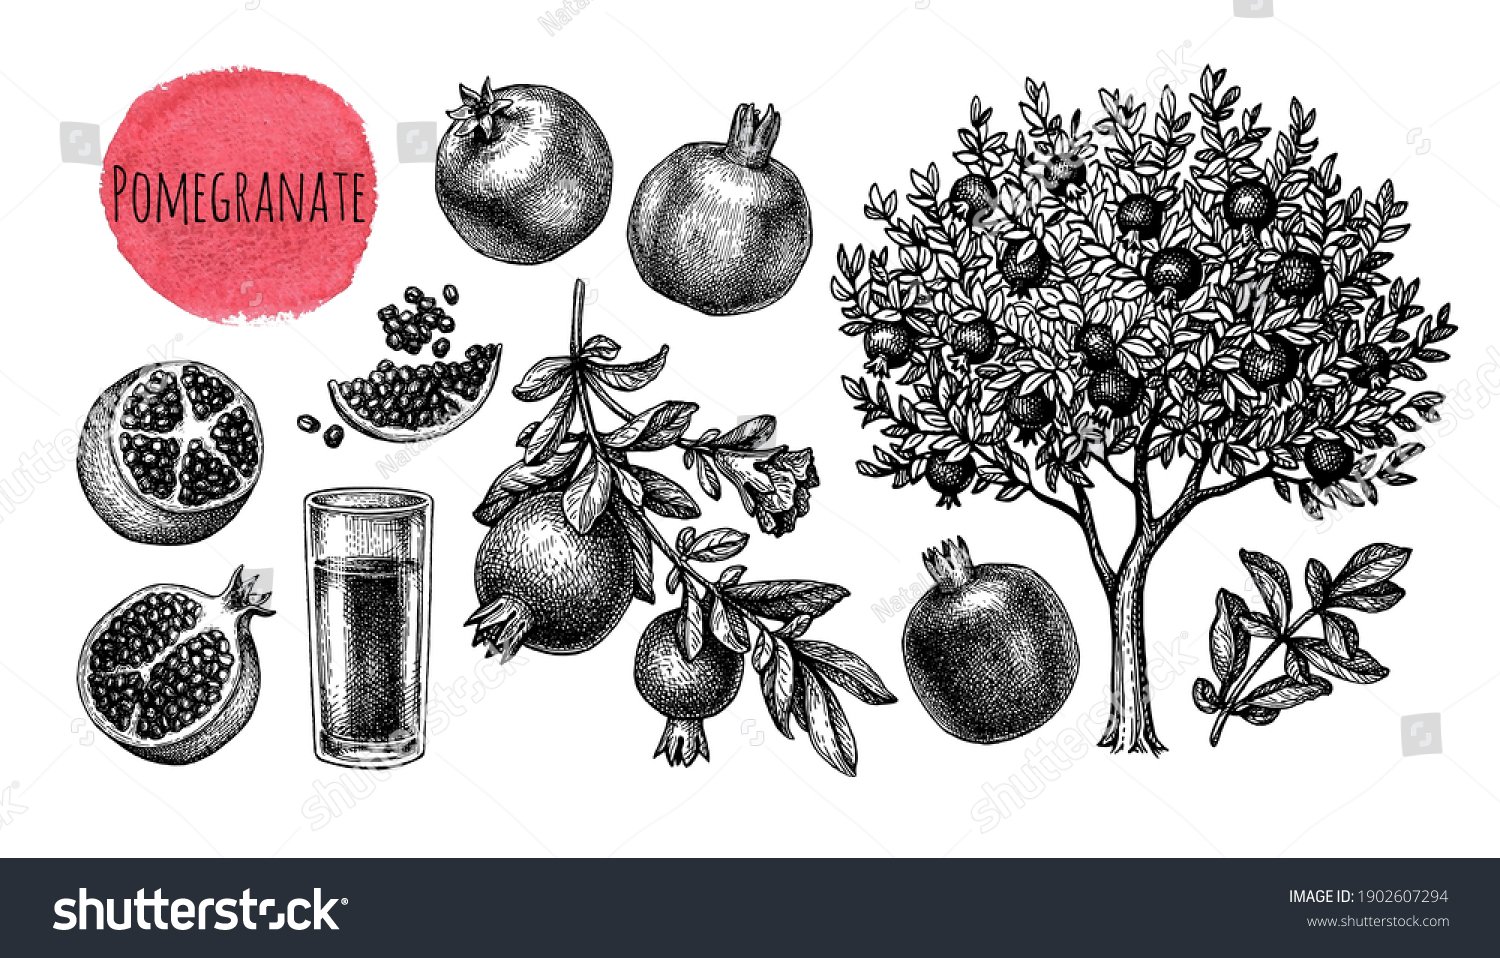 stock-vector-pomegranate-big-set-tree-branches-fruits-and-seeds-glass-of-juice-ink-sketch-isolated-on-white-1902607294.jpg